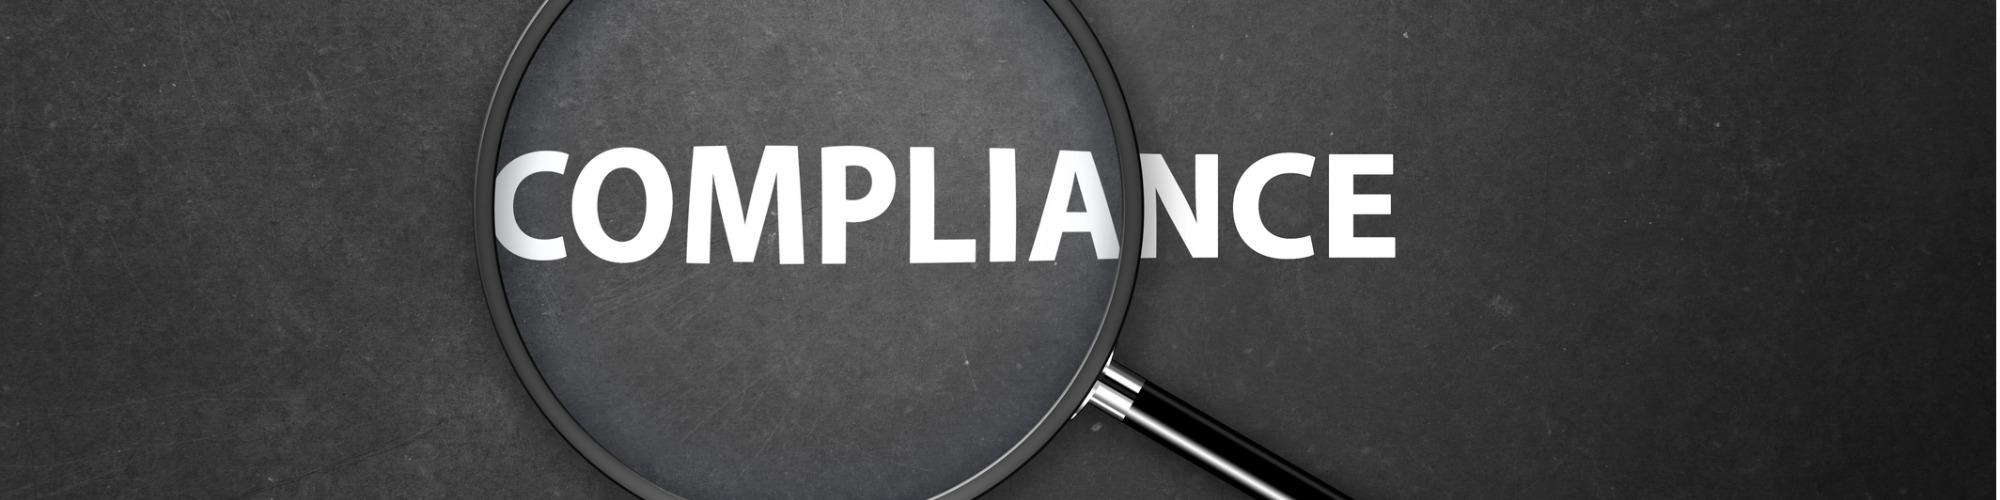 Preparing Yourself for Senior Compliance Responsibilities - A Guide For FCA Authorised Firms